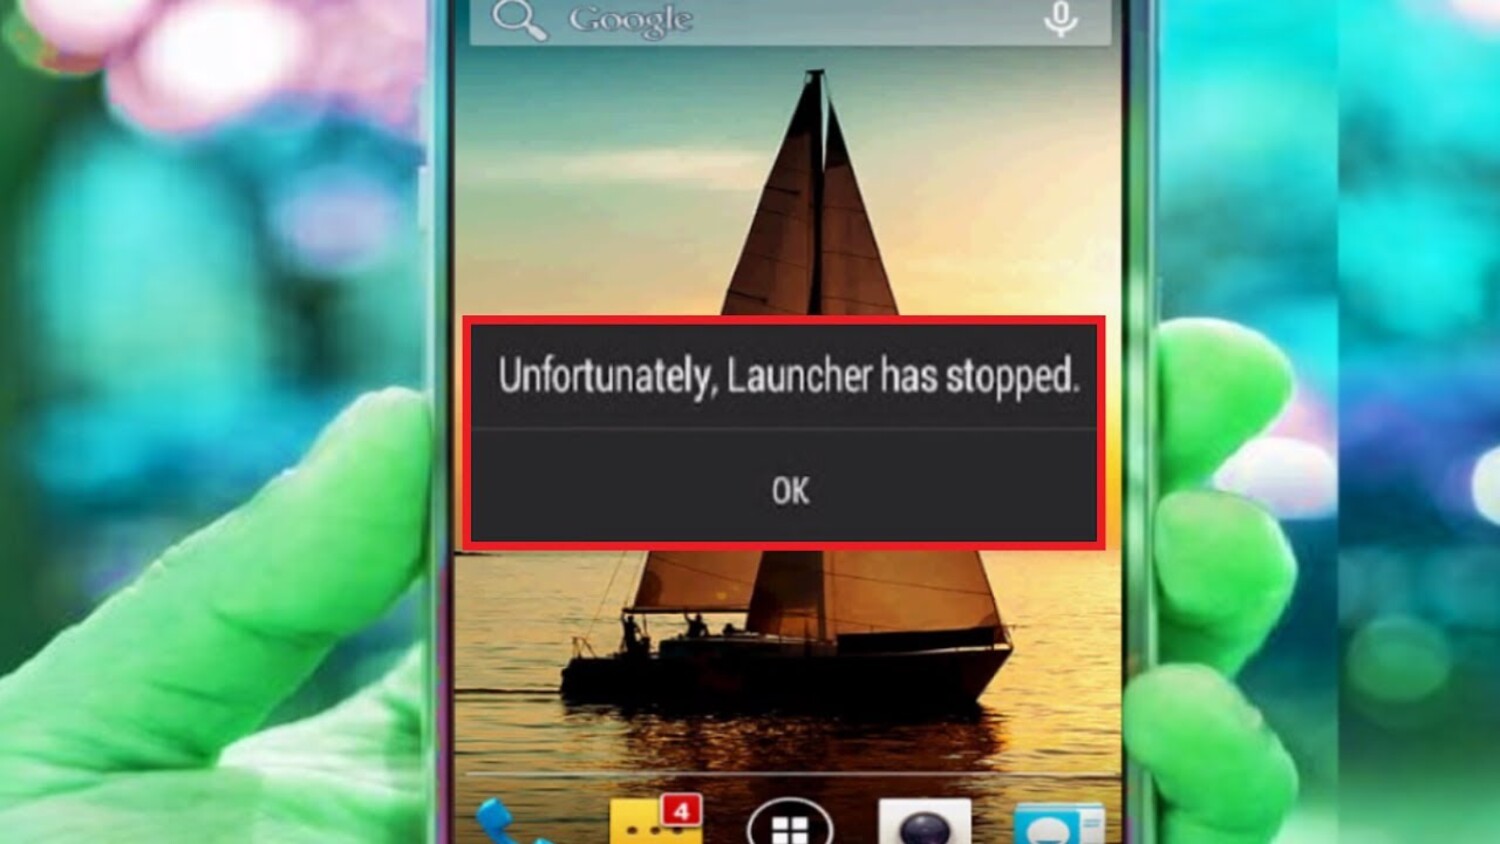 Unfortunately launcher has stopped